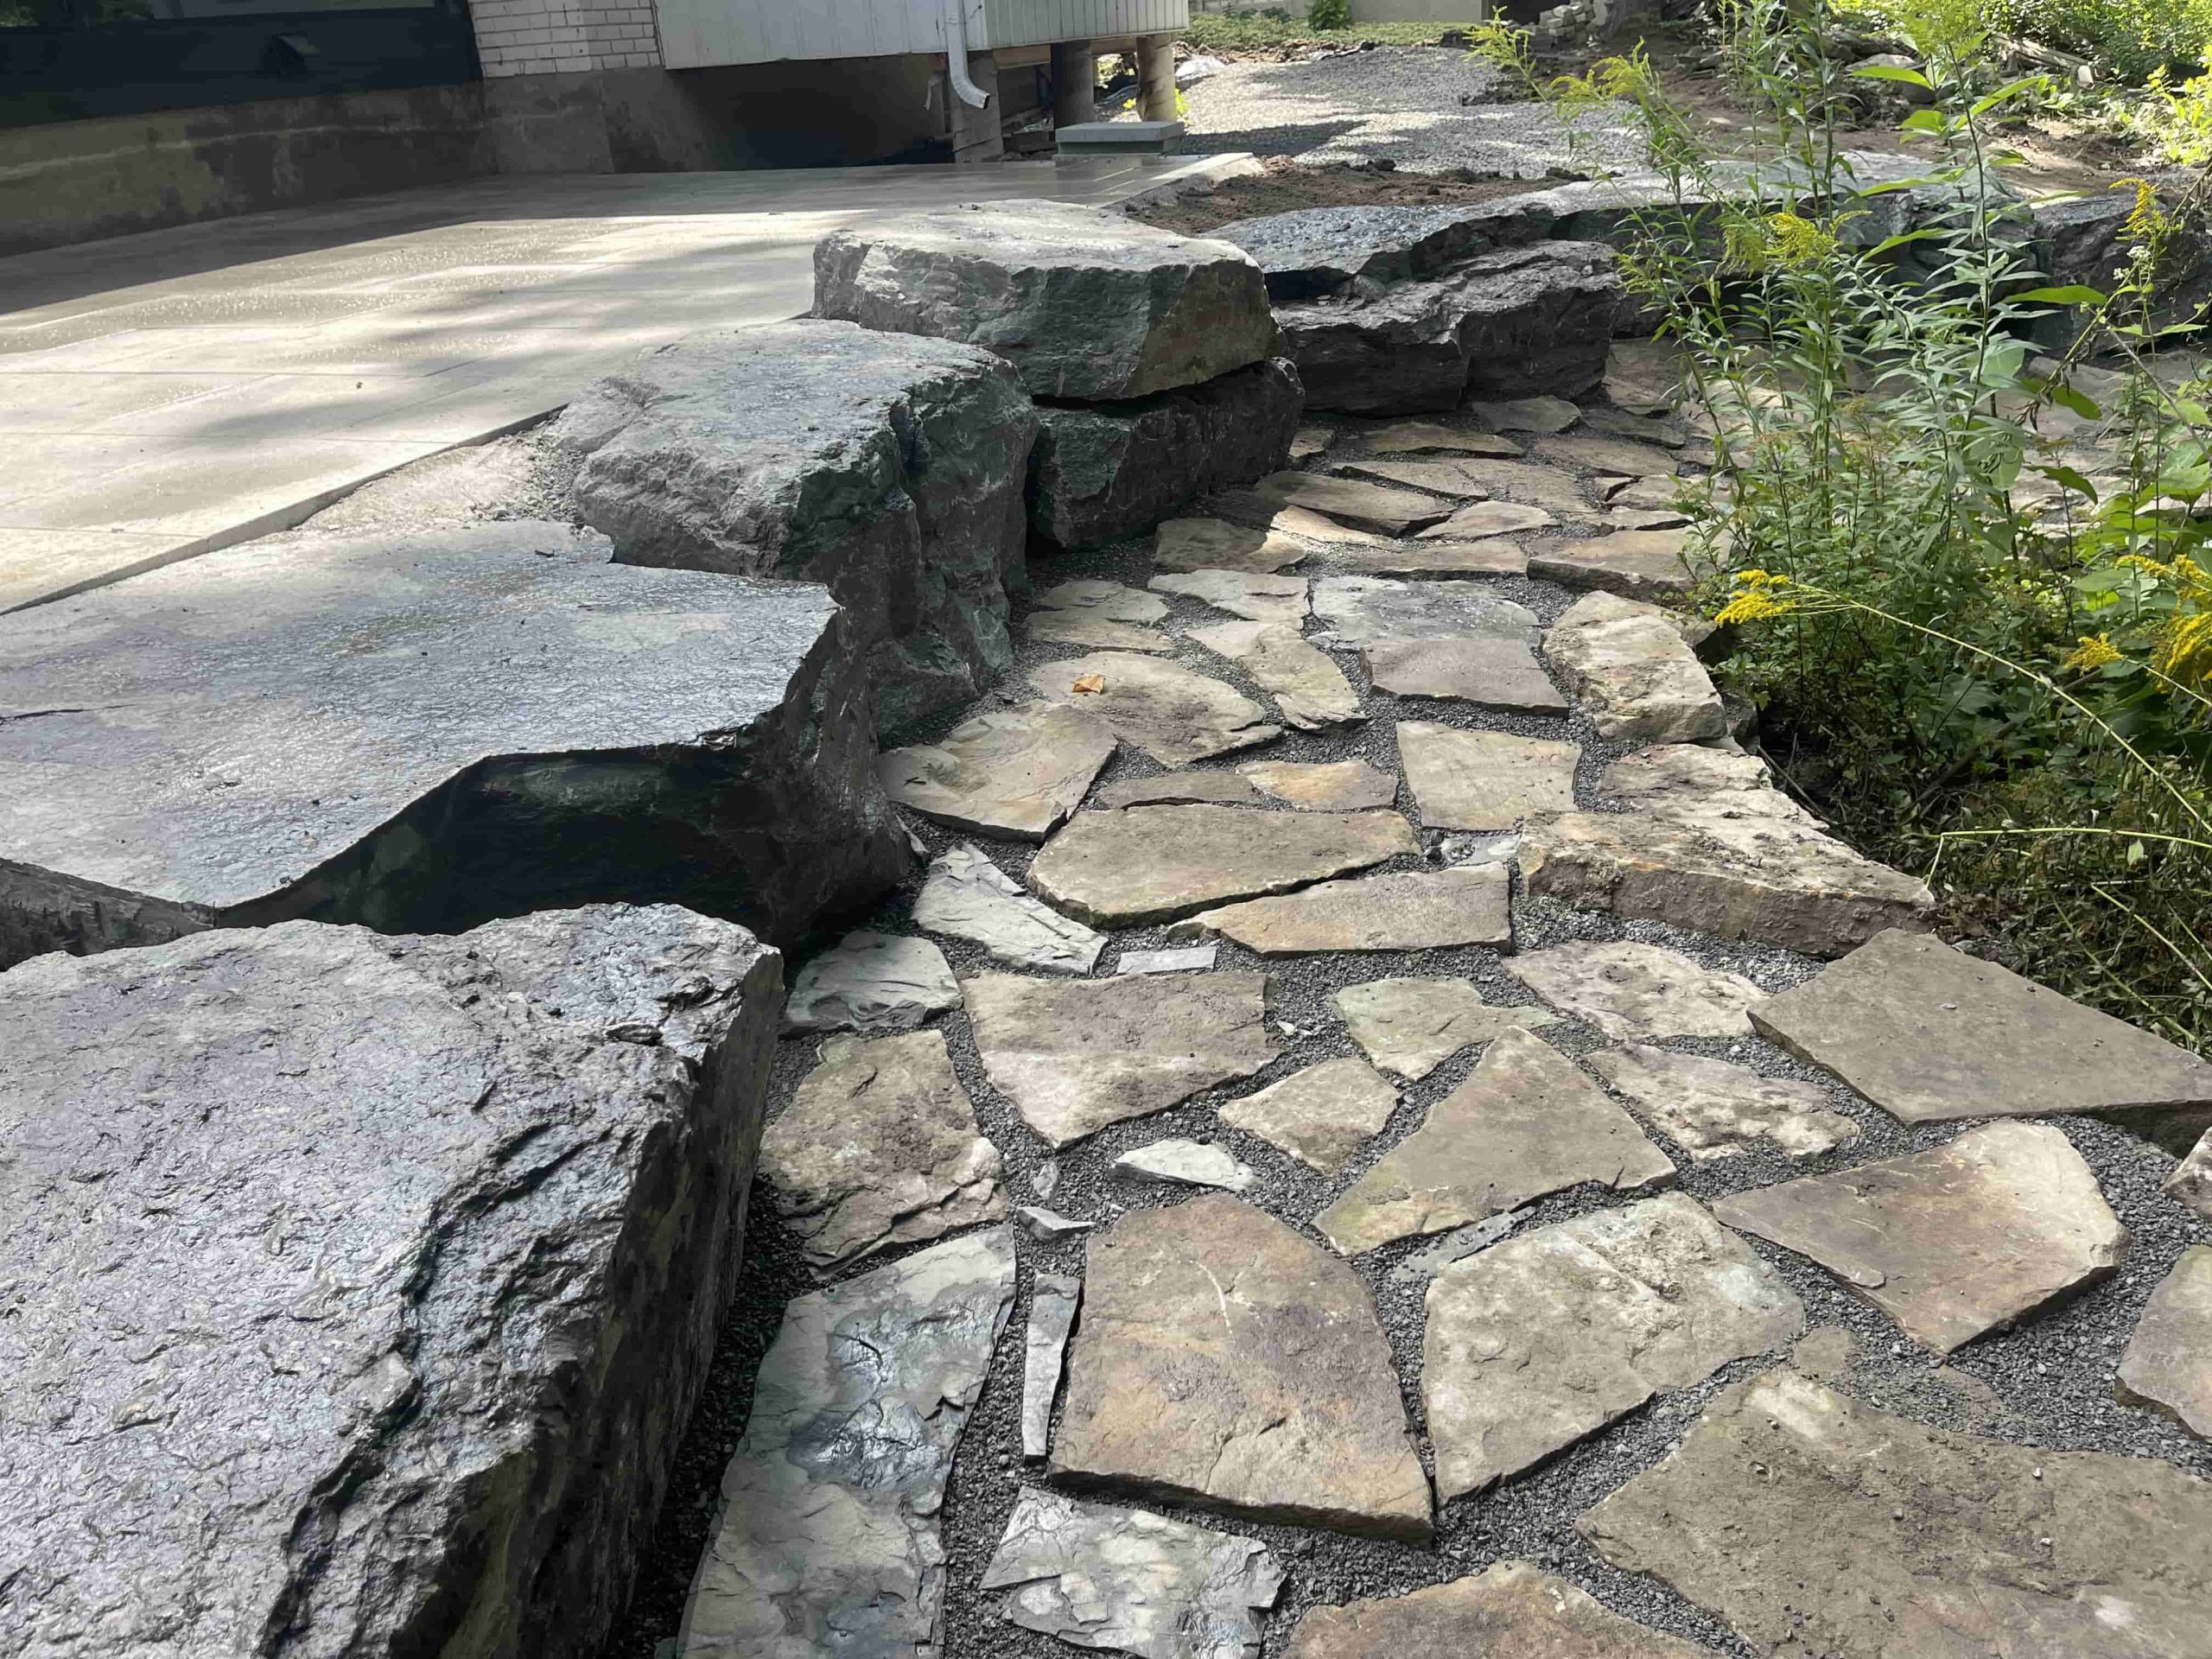 A skillfully installed flagstone pathway winds through a verdant garden, bordered by large boulders and lush foliage, showcasing the quality craftsmanship of professional flagstone services.